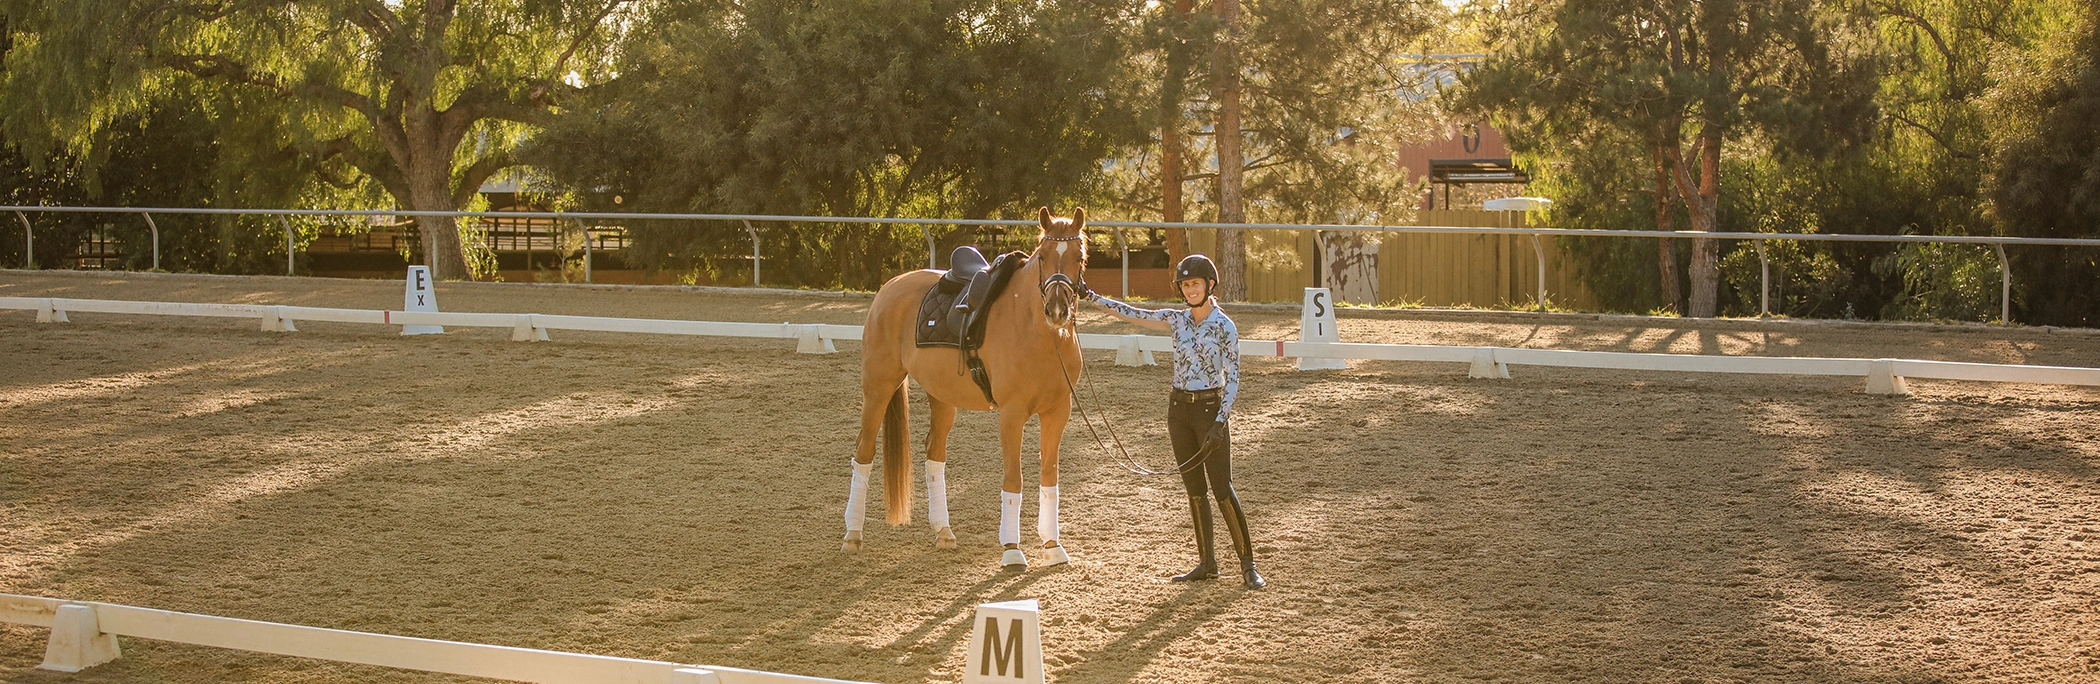 Amelia Newcomb standing in a dressage arena posing and smiling with a chestnut dressage horse.